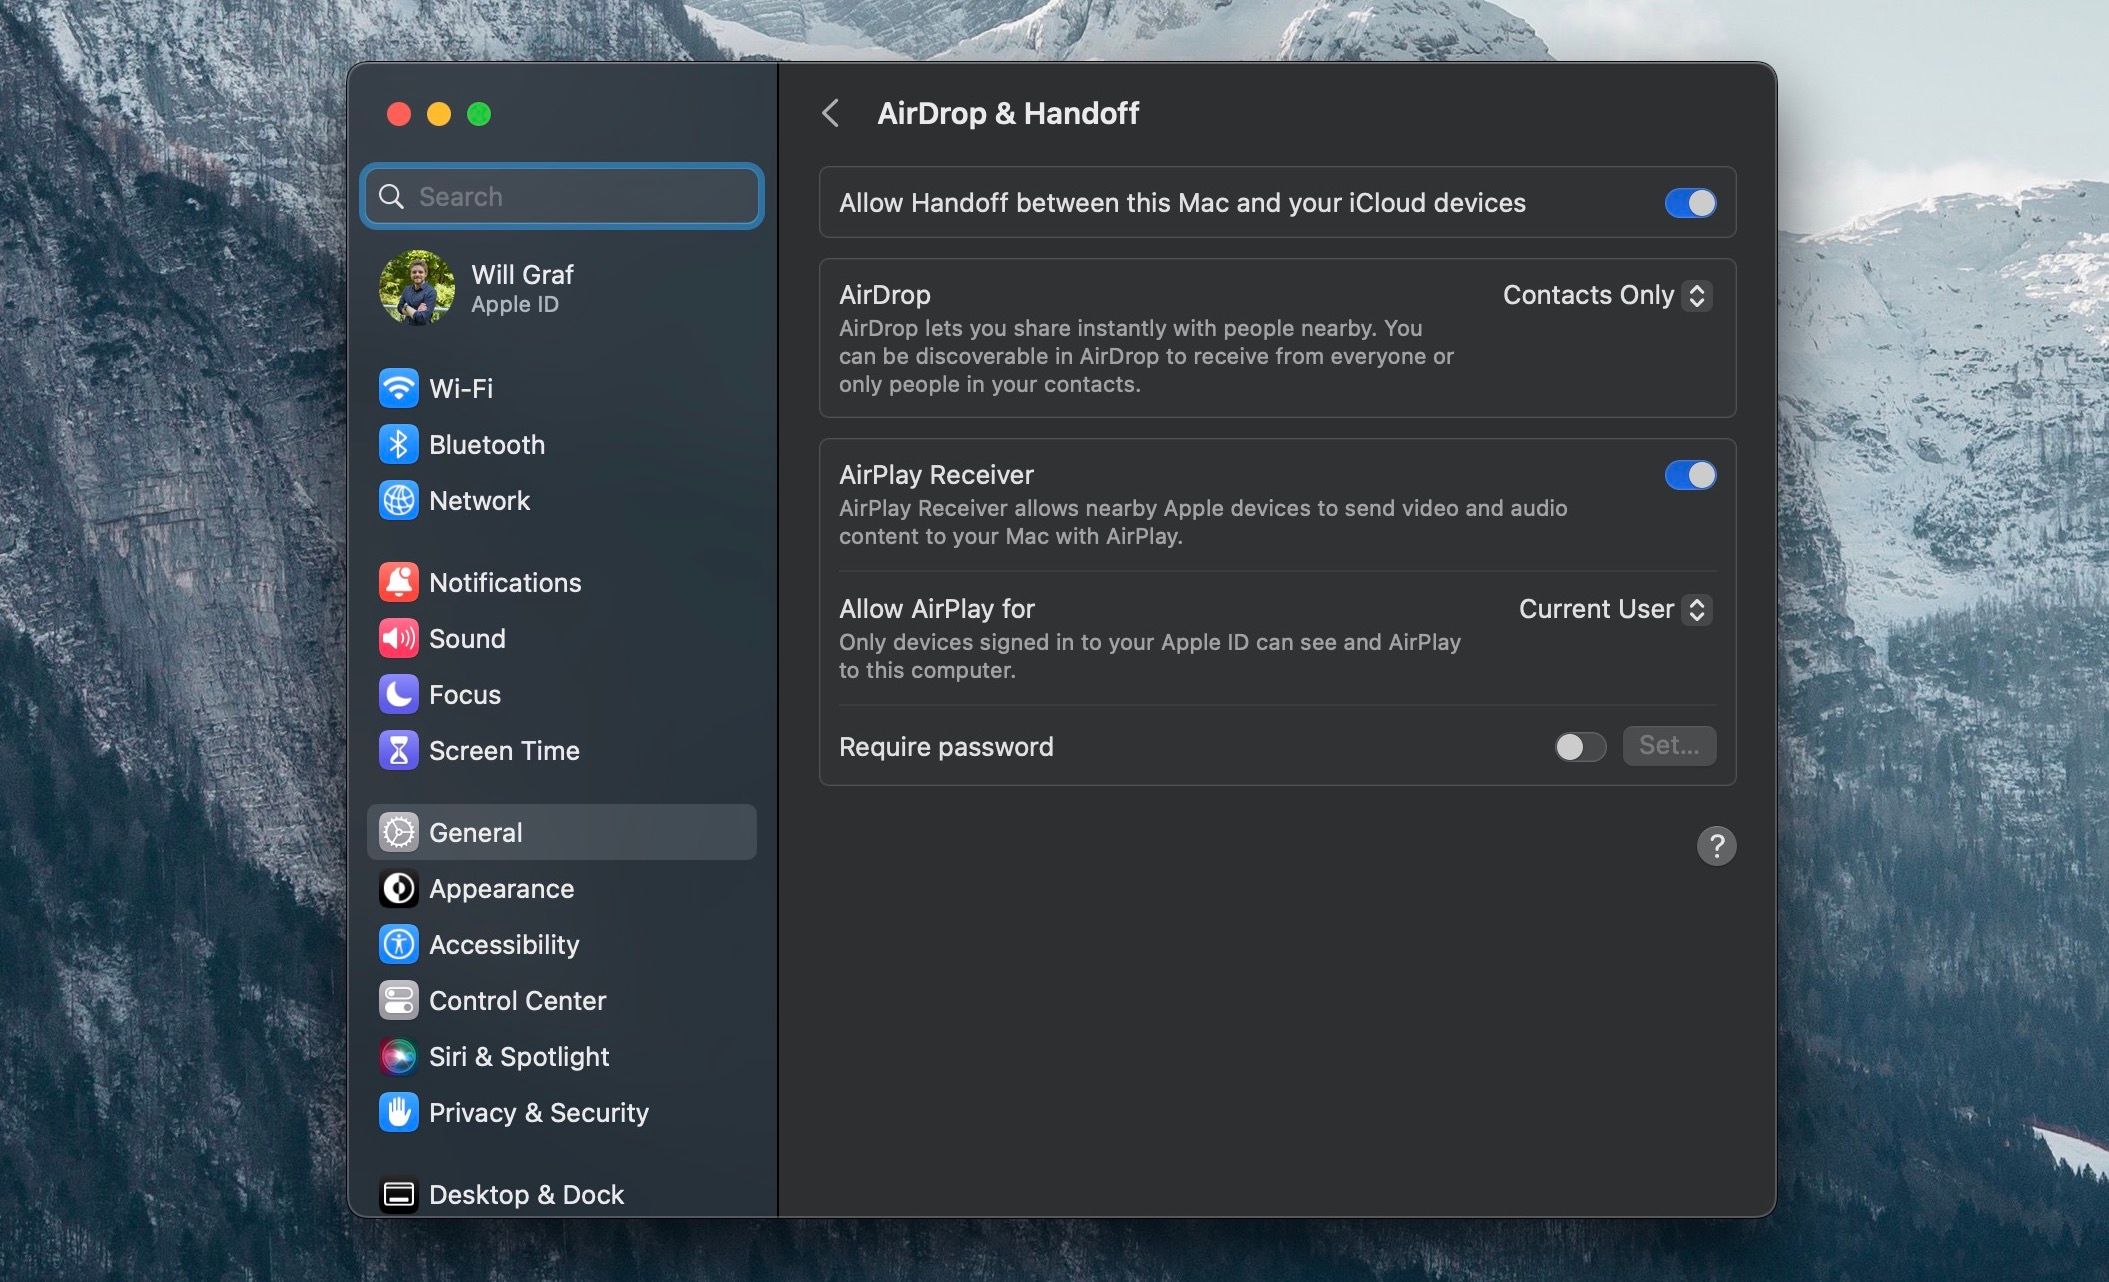 Handoff and AirDrop settings in macOS